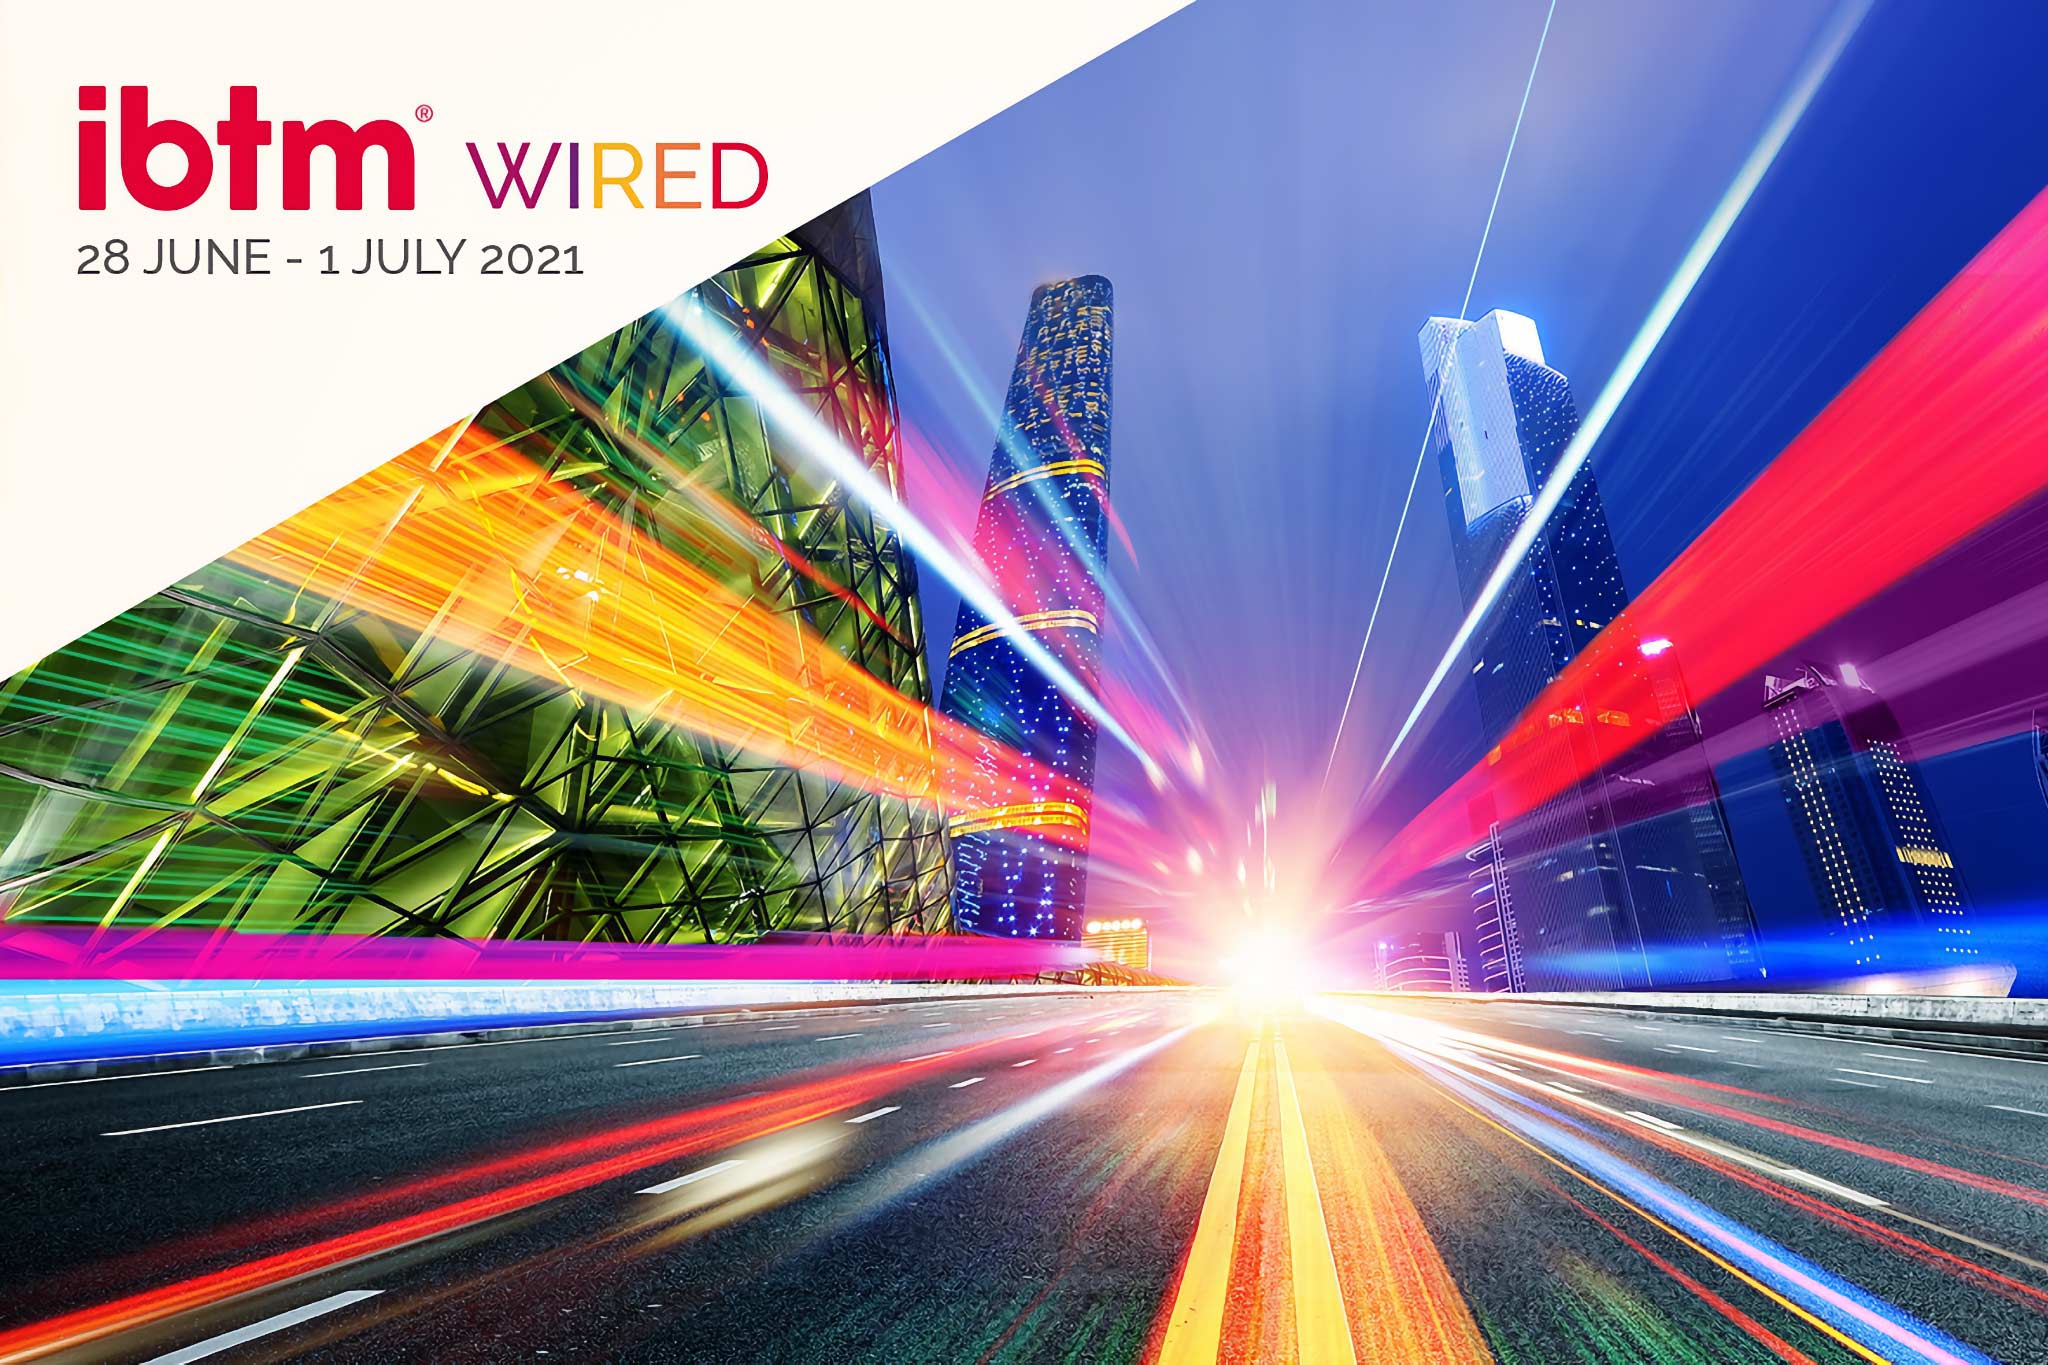 IBTM Wired 2021